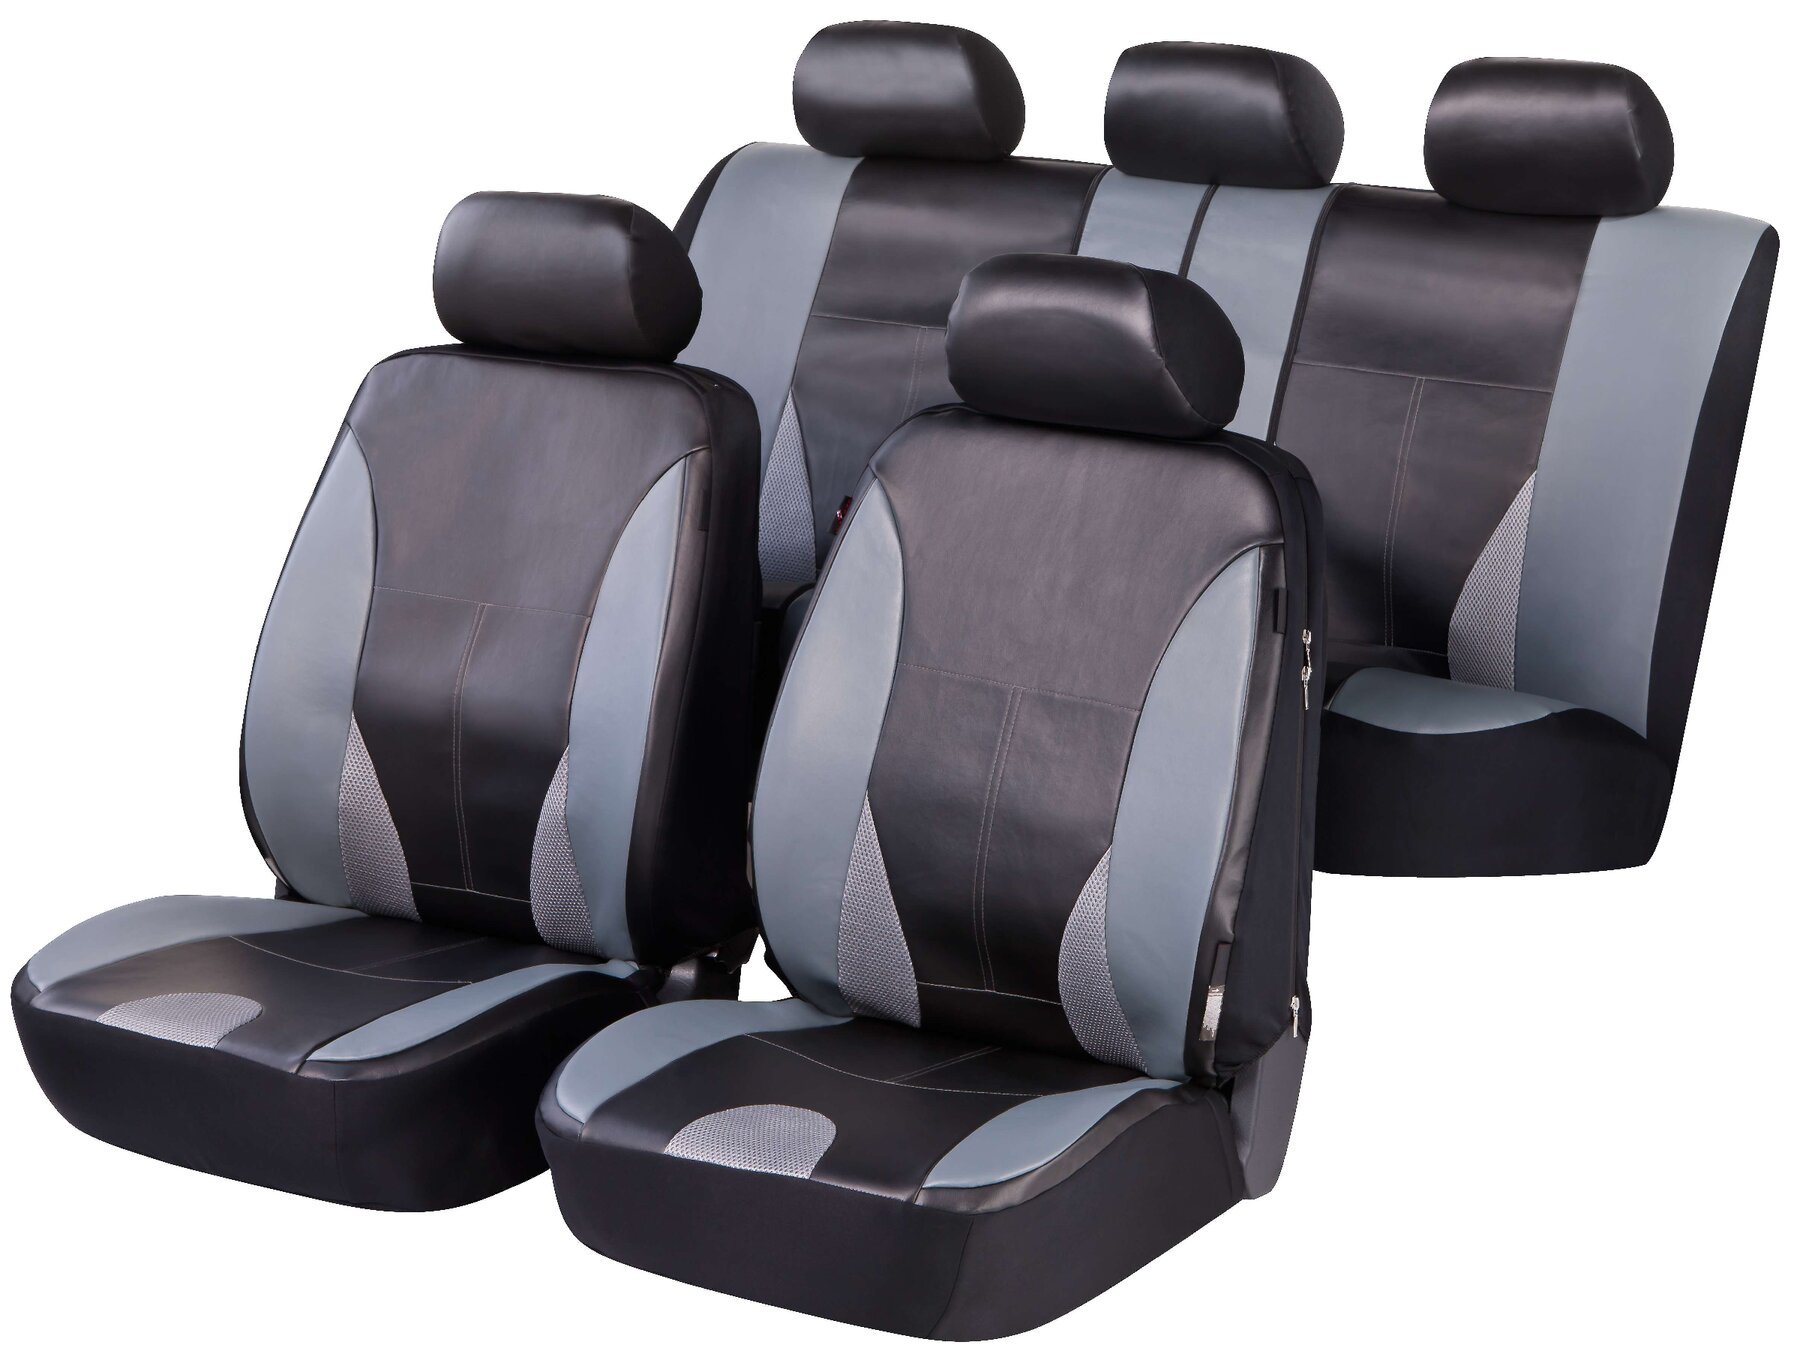 ZIPP IT Deluxe Sporting car Seat covers in imitation leather with zipper system